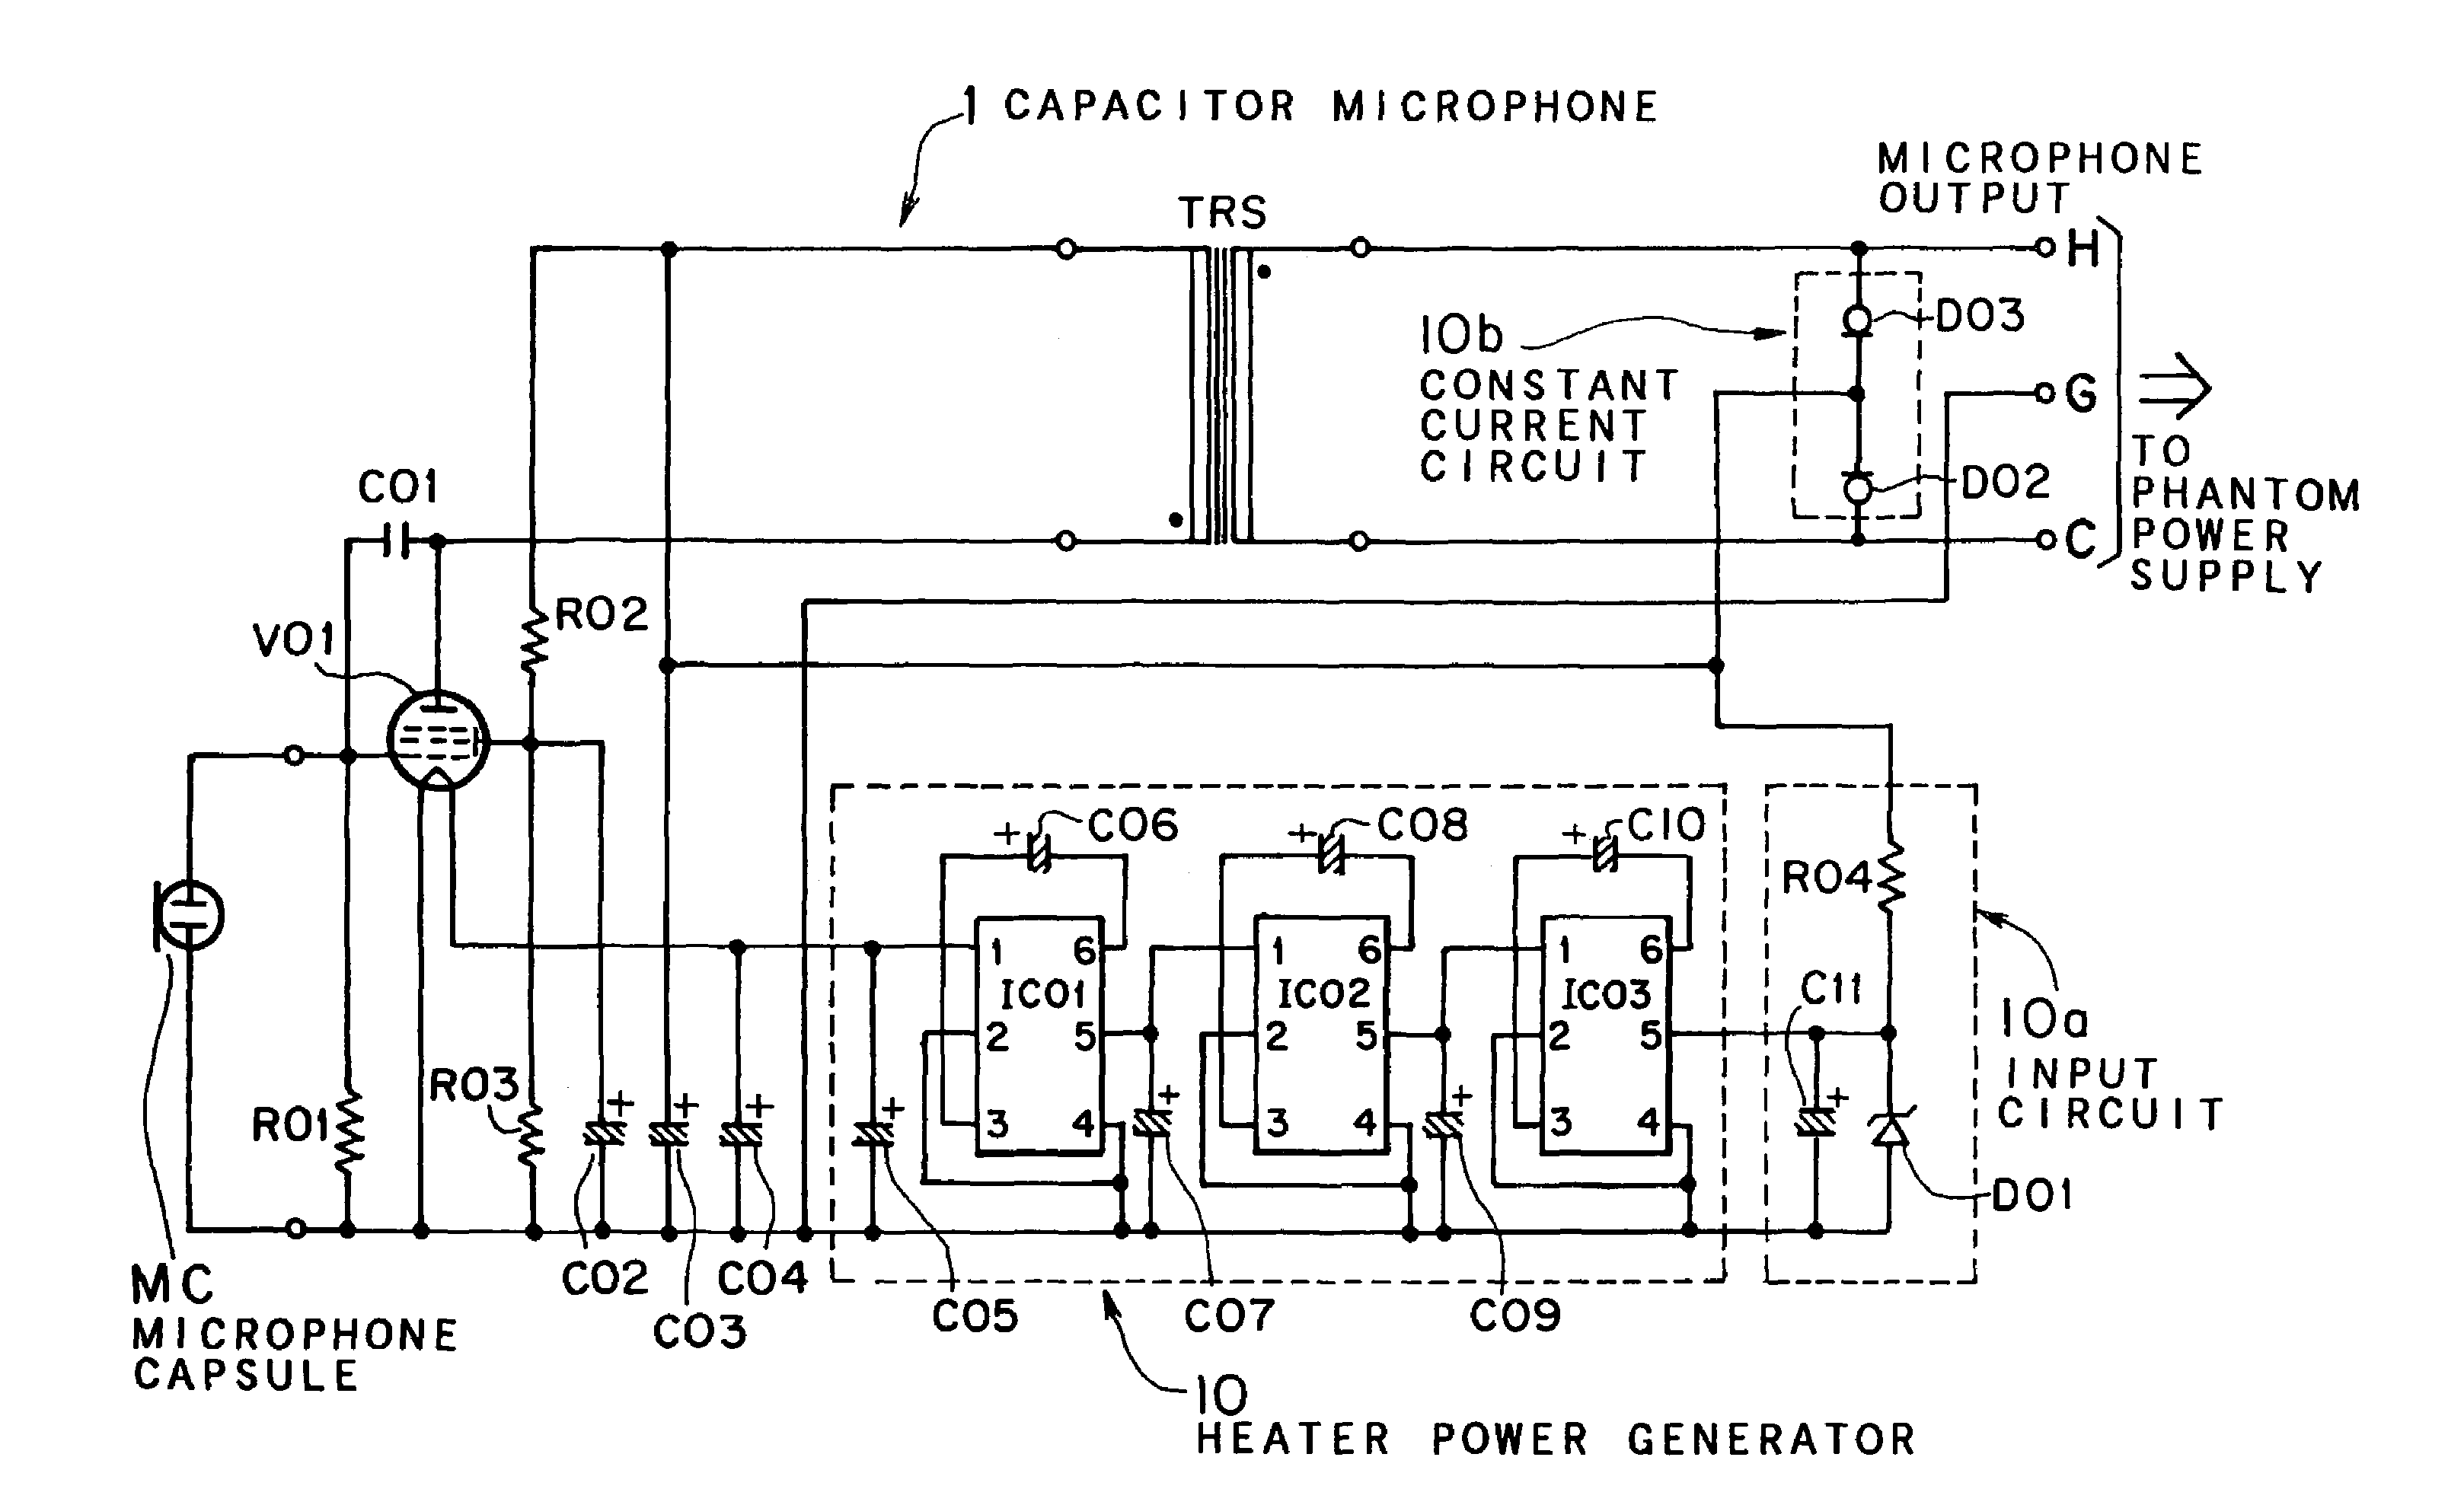 Phantom powered capacitor microphone and a method of using a vacuum tube in the same